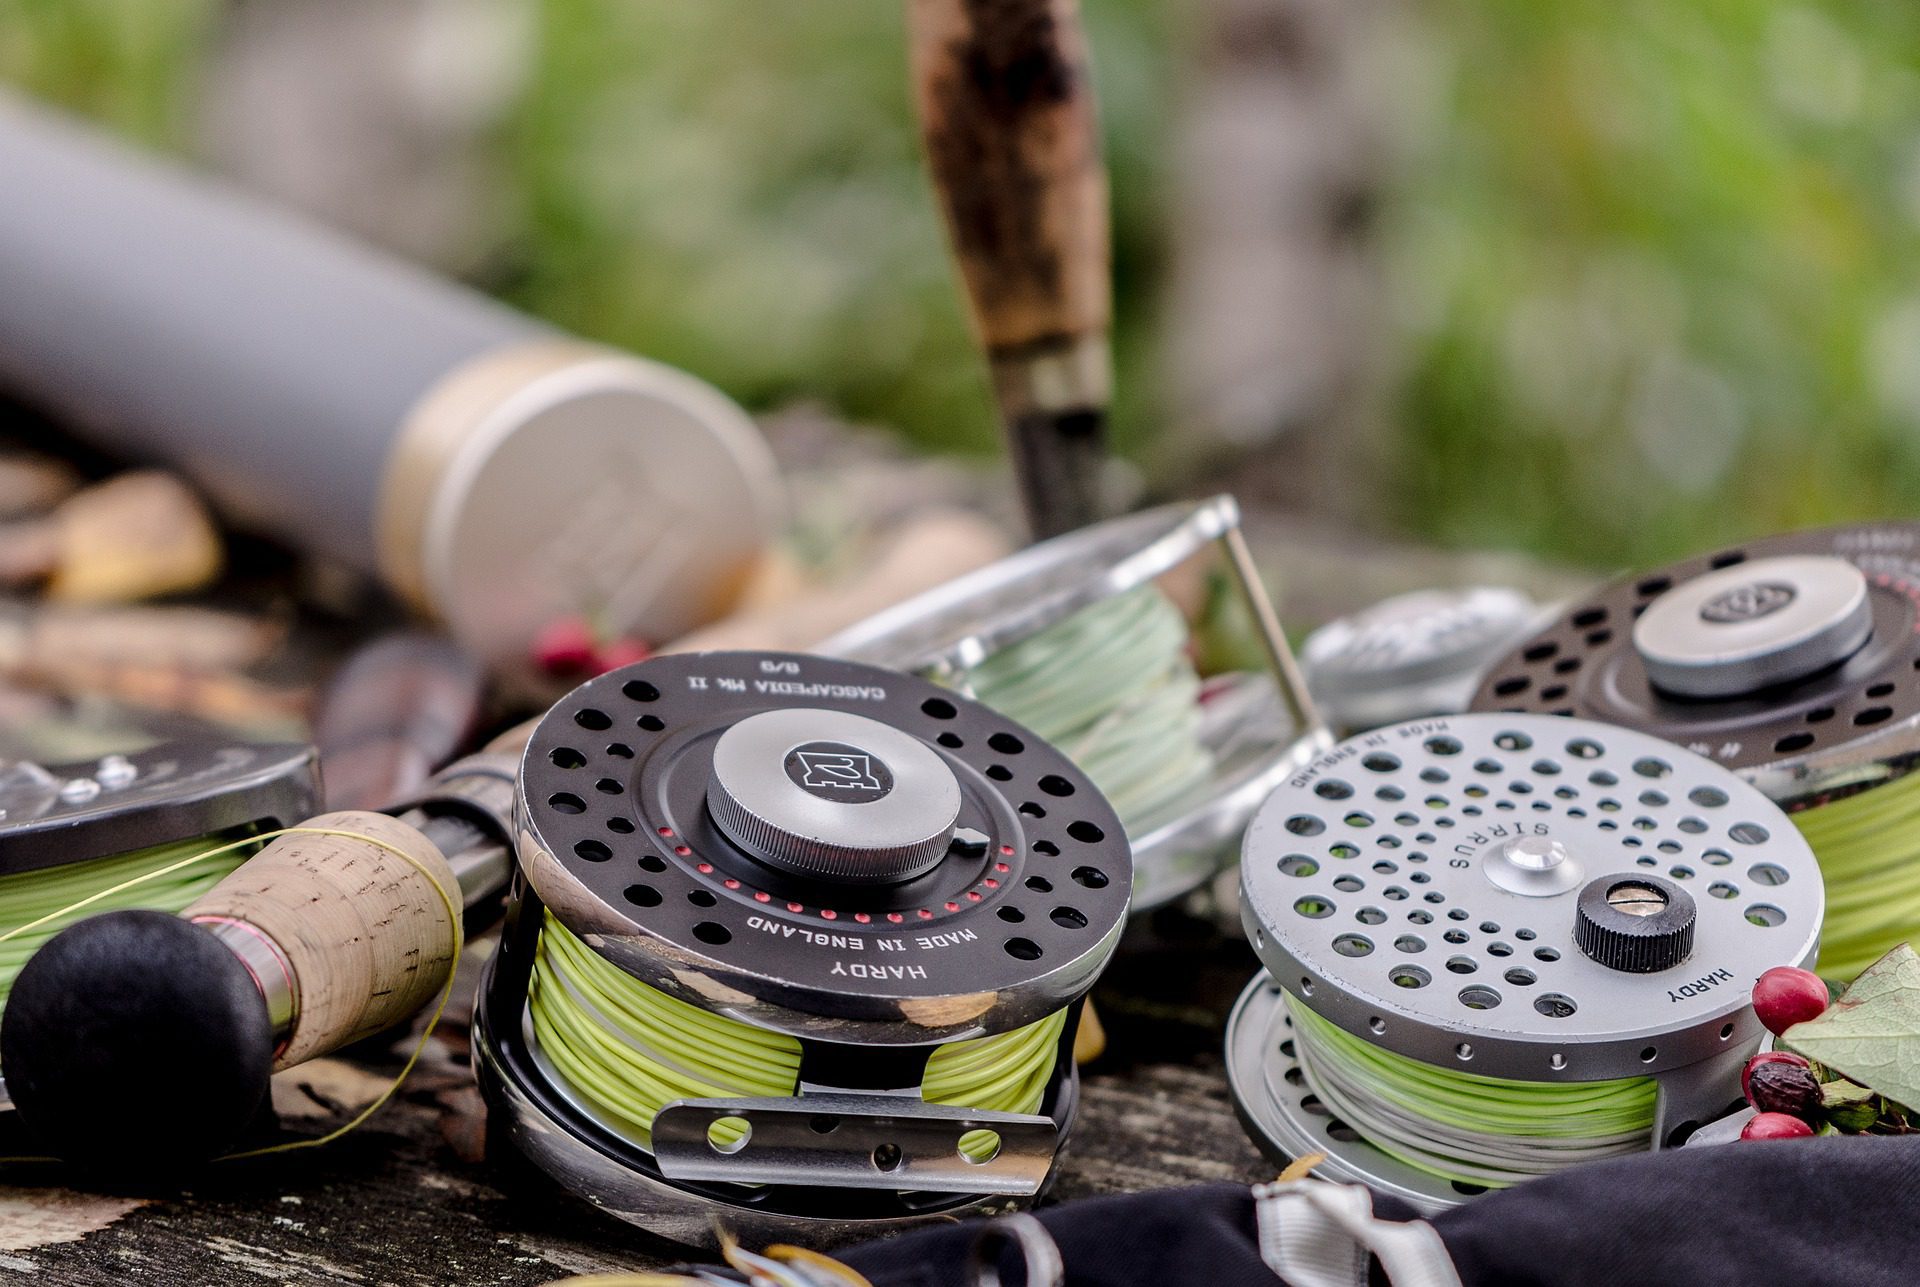 https://outdoors-international.com/wp-content/uploads/2021/11/FLY-FISHING-RODS-REELS-COMBOS-sirrus-2942784_1920.jpg